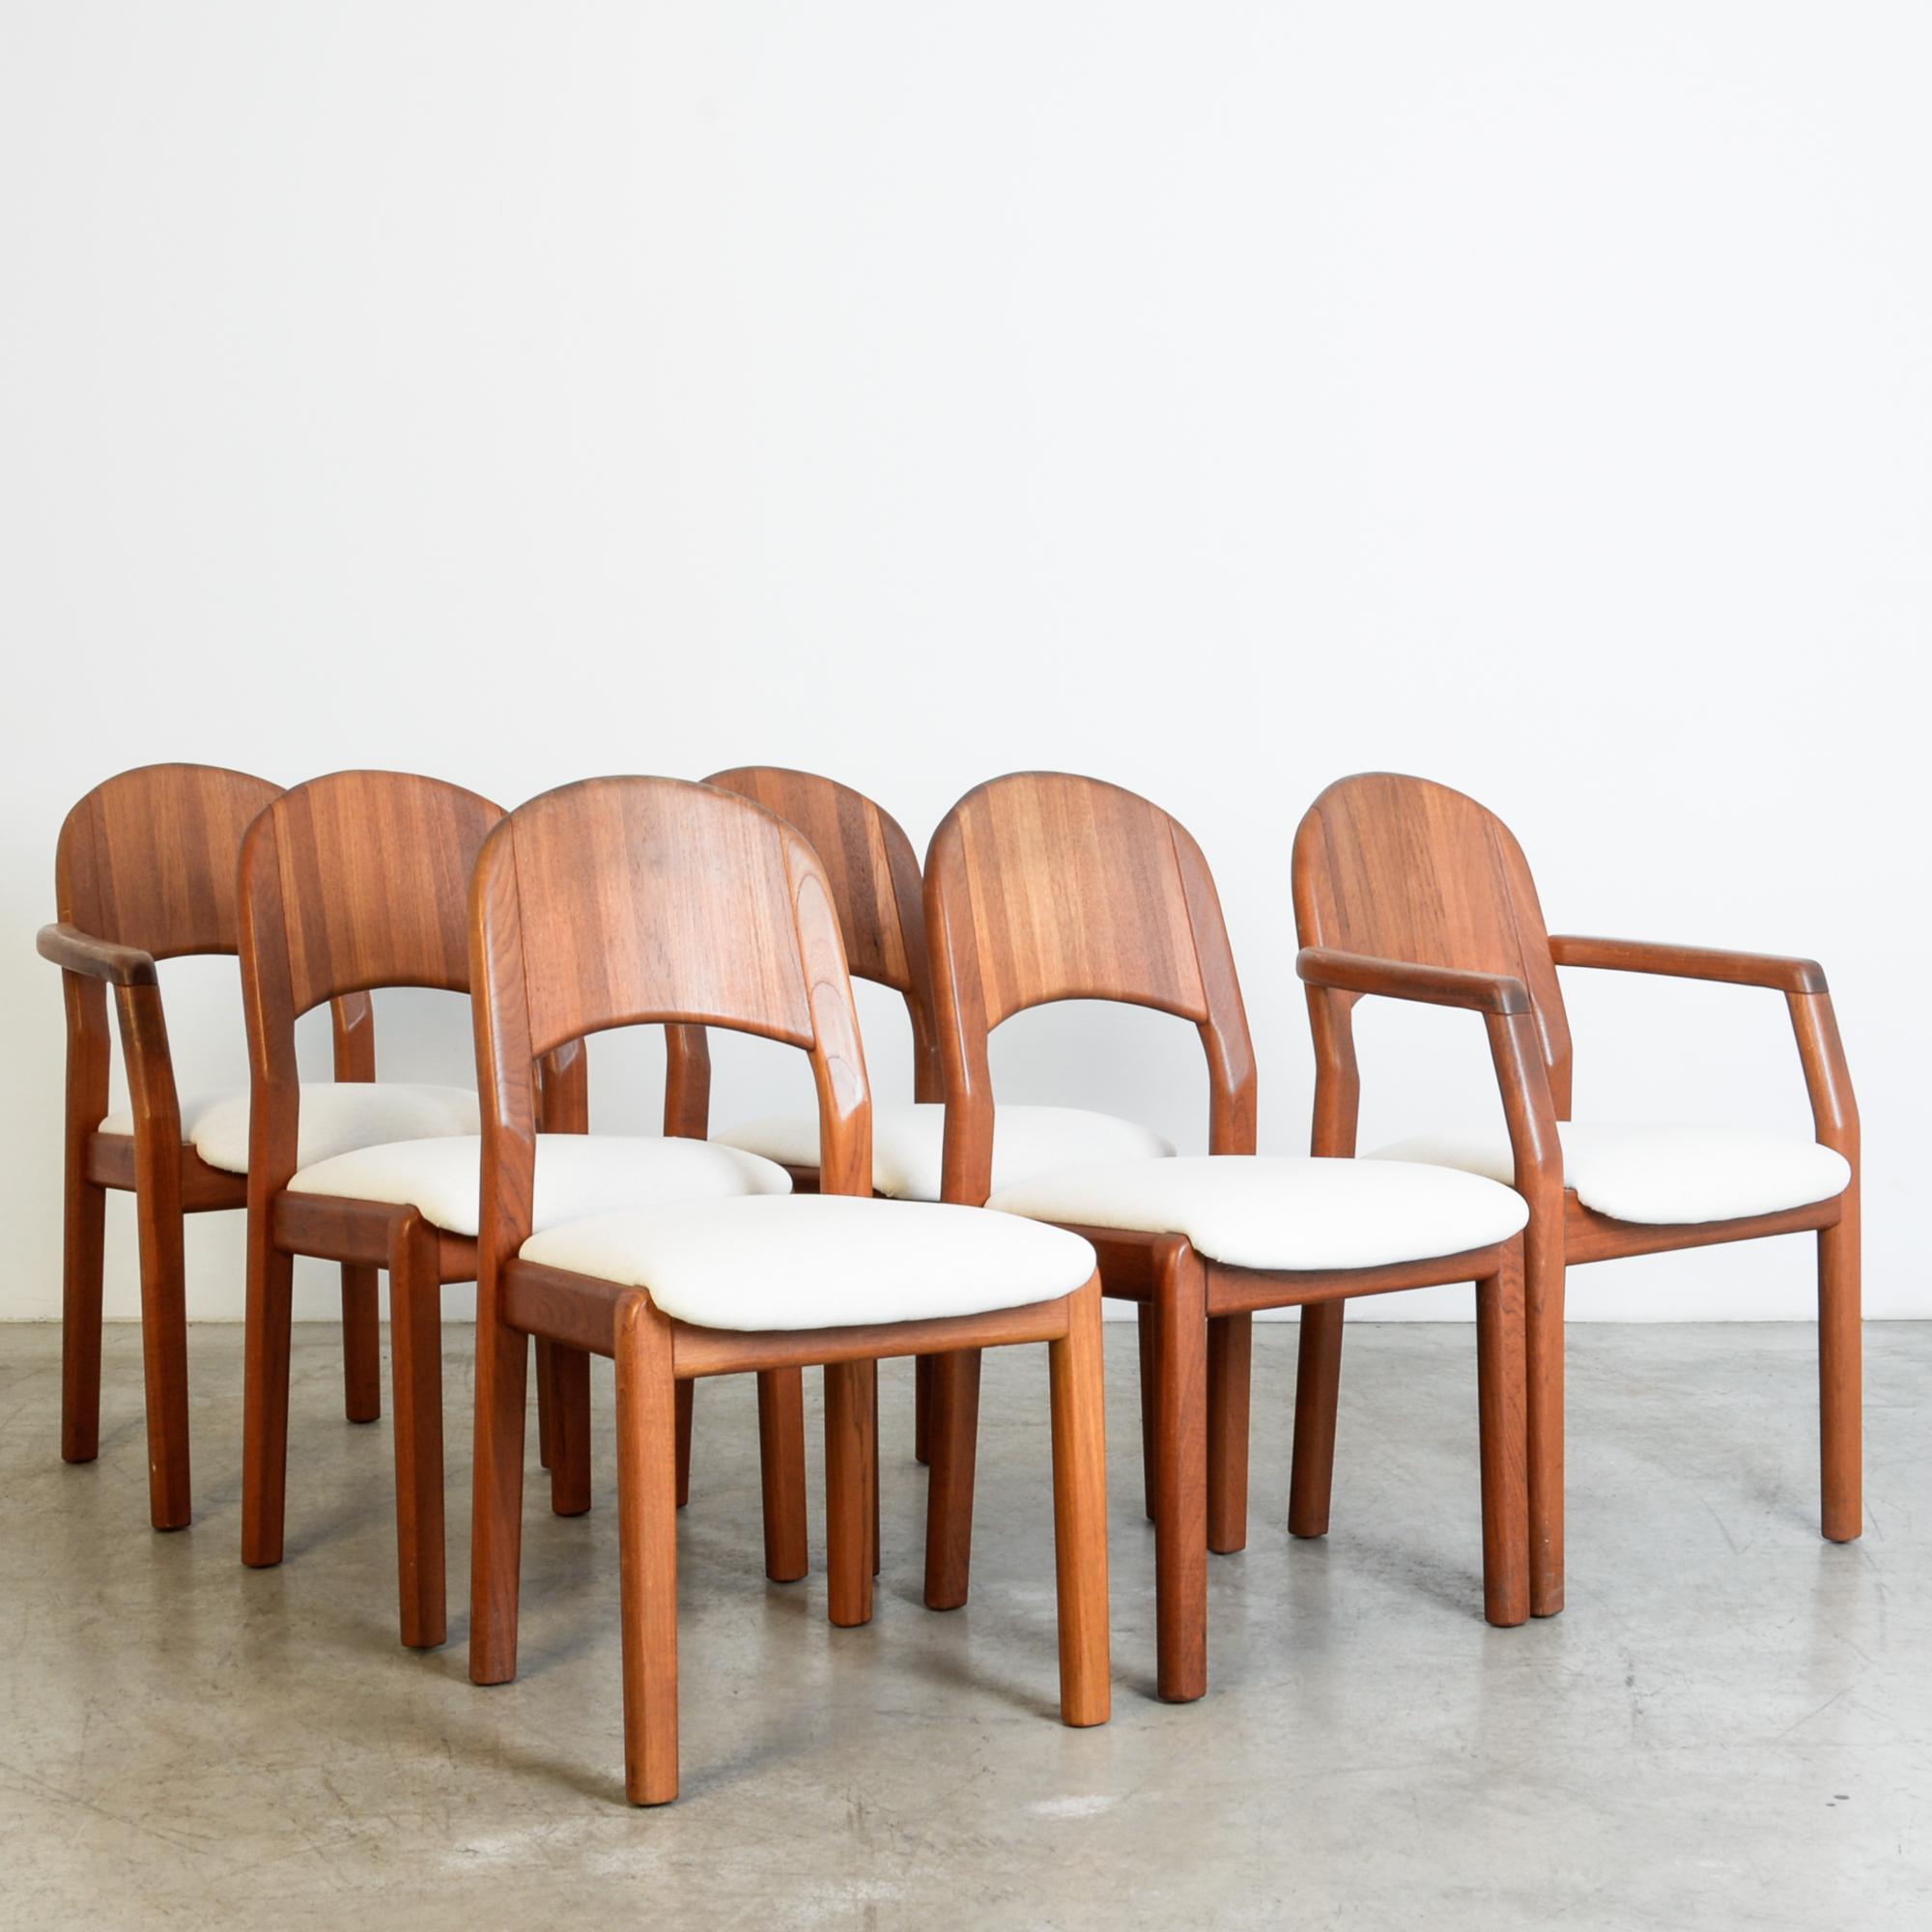 A geometric hardwood dining chair set in characteristic mid-20th century modernist style. Simple and sturdy forms combine dynamically, at angles with reclining back and supportive legs. The re-upholstered seat echoes the shape of a unique solid wood